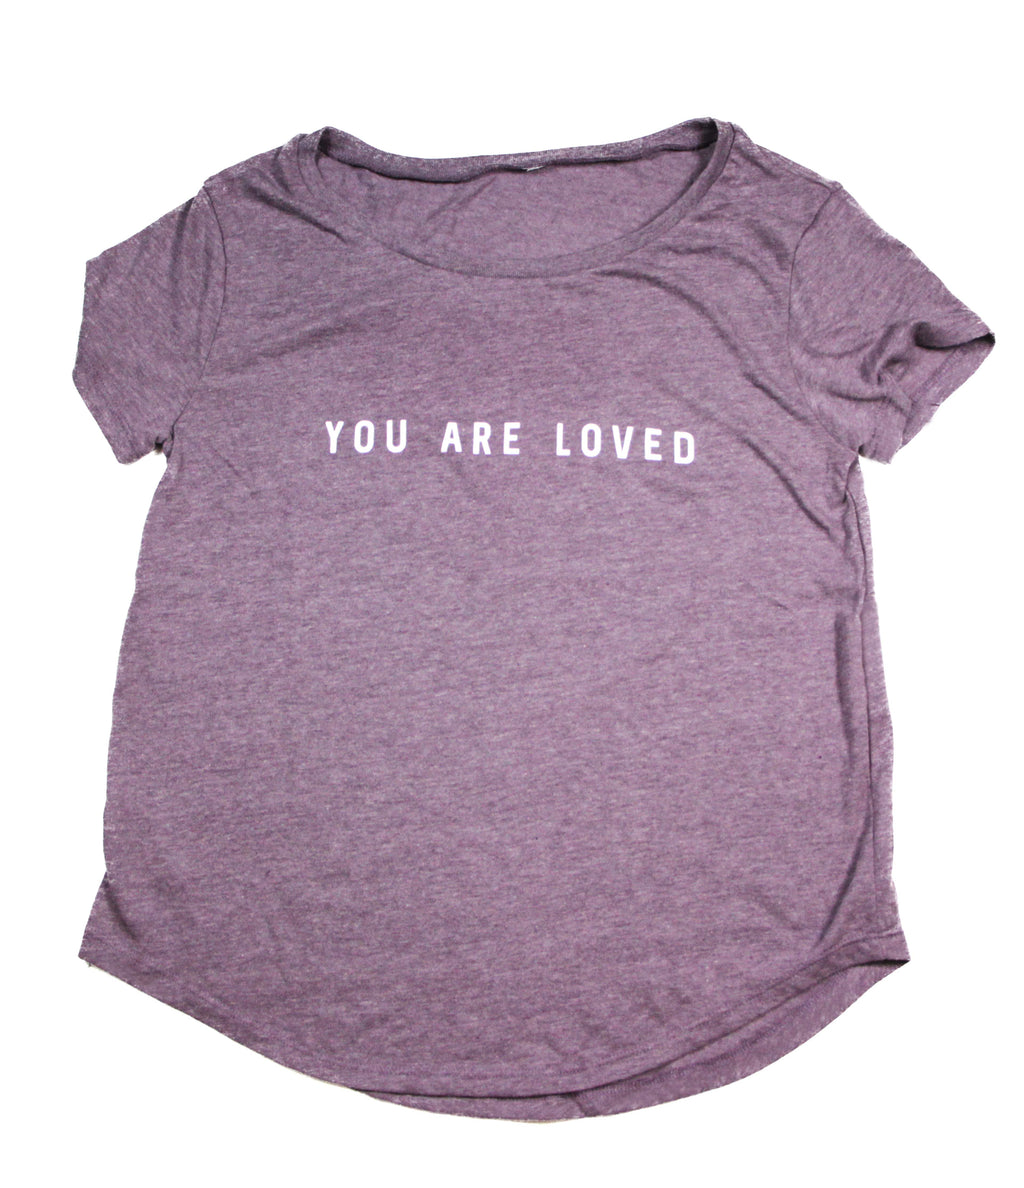 YOU ARE LOVED LILAC WOMEN'S SCOOP NECK T-SHIRT